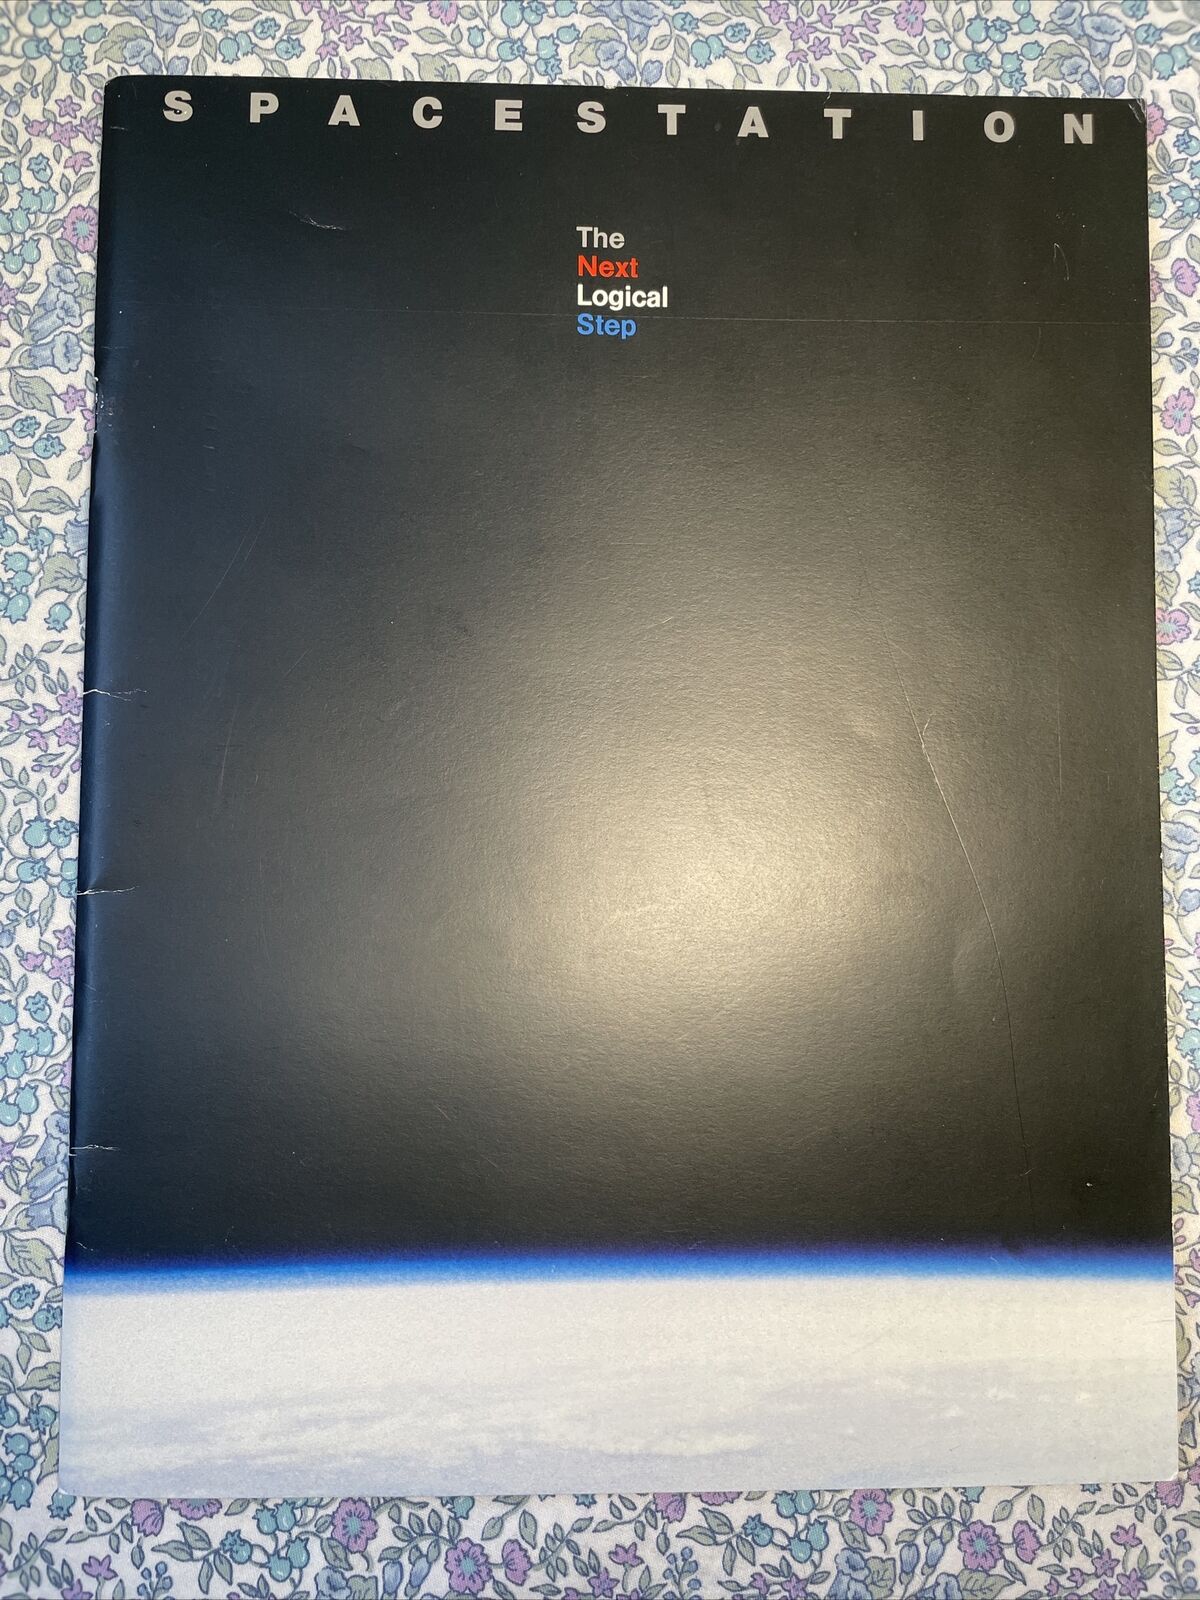 Rare NASA Spacestation The Next Logical Step EP 213 1984 Walter Froehlich Book